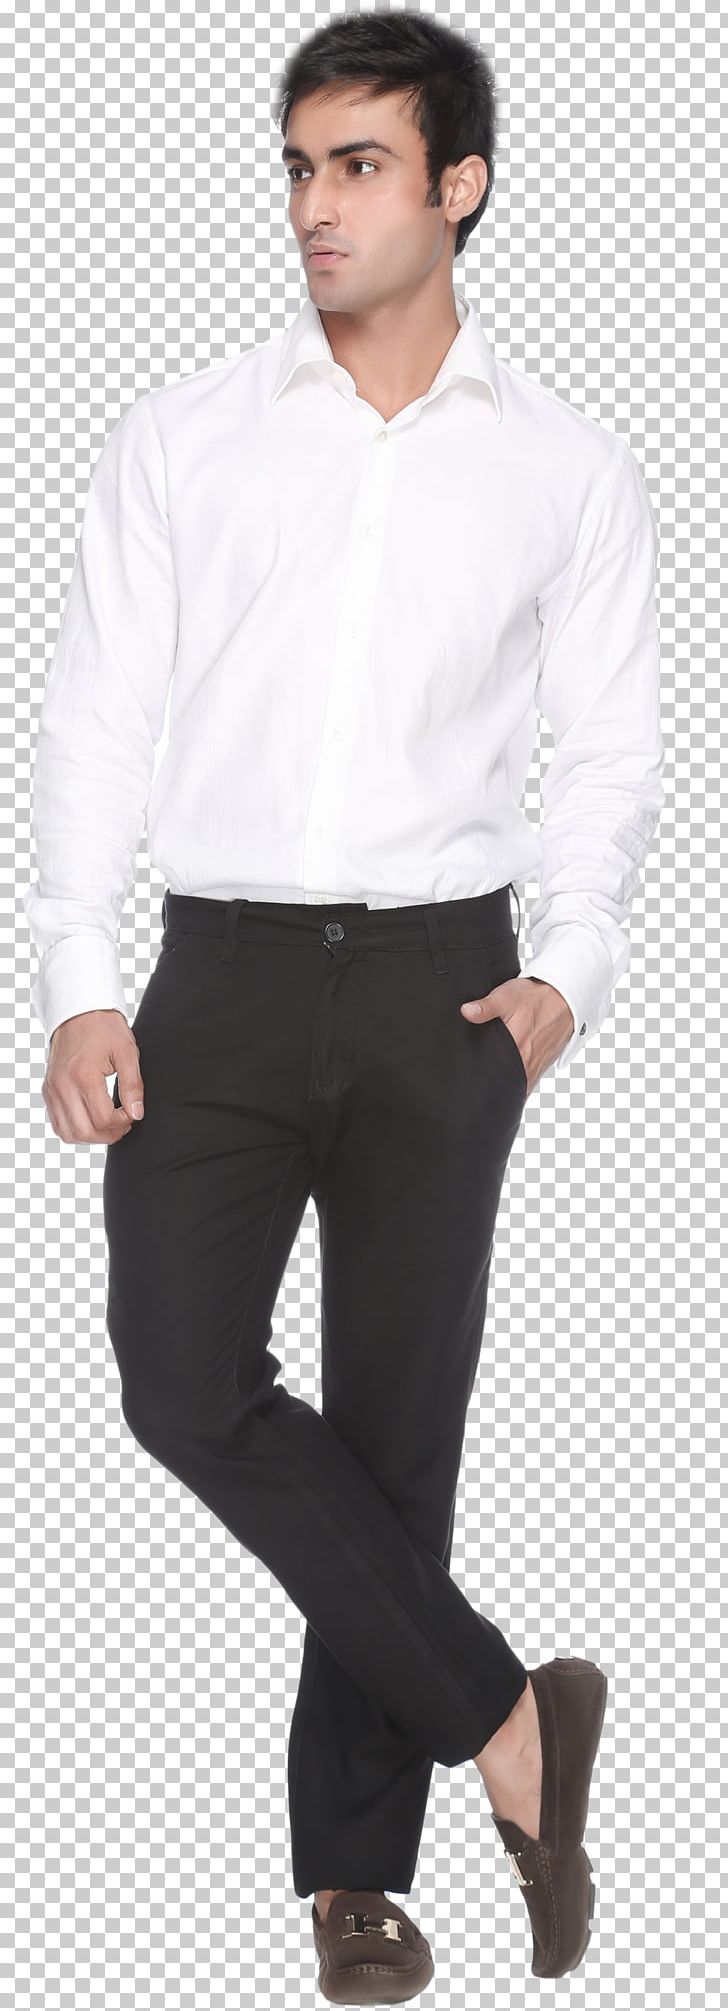 Clothing Formal Wear Pants Semi-formal Casual PNG, Clipart, Abdomen, Casual, Clothing, Collar, Dress Free PNG Download